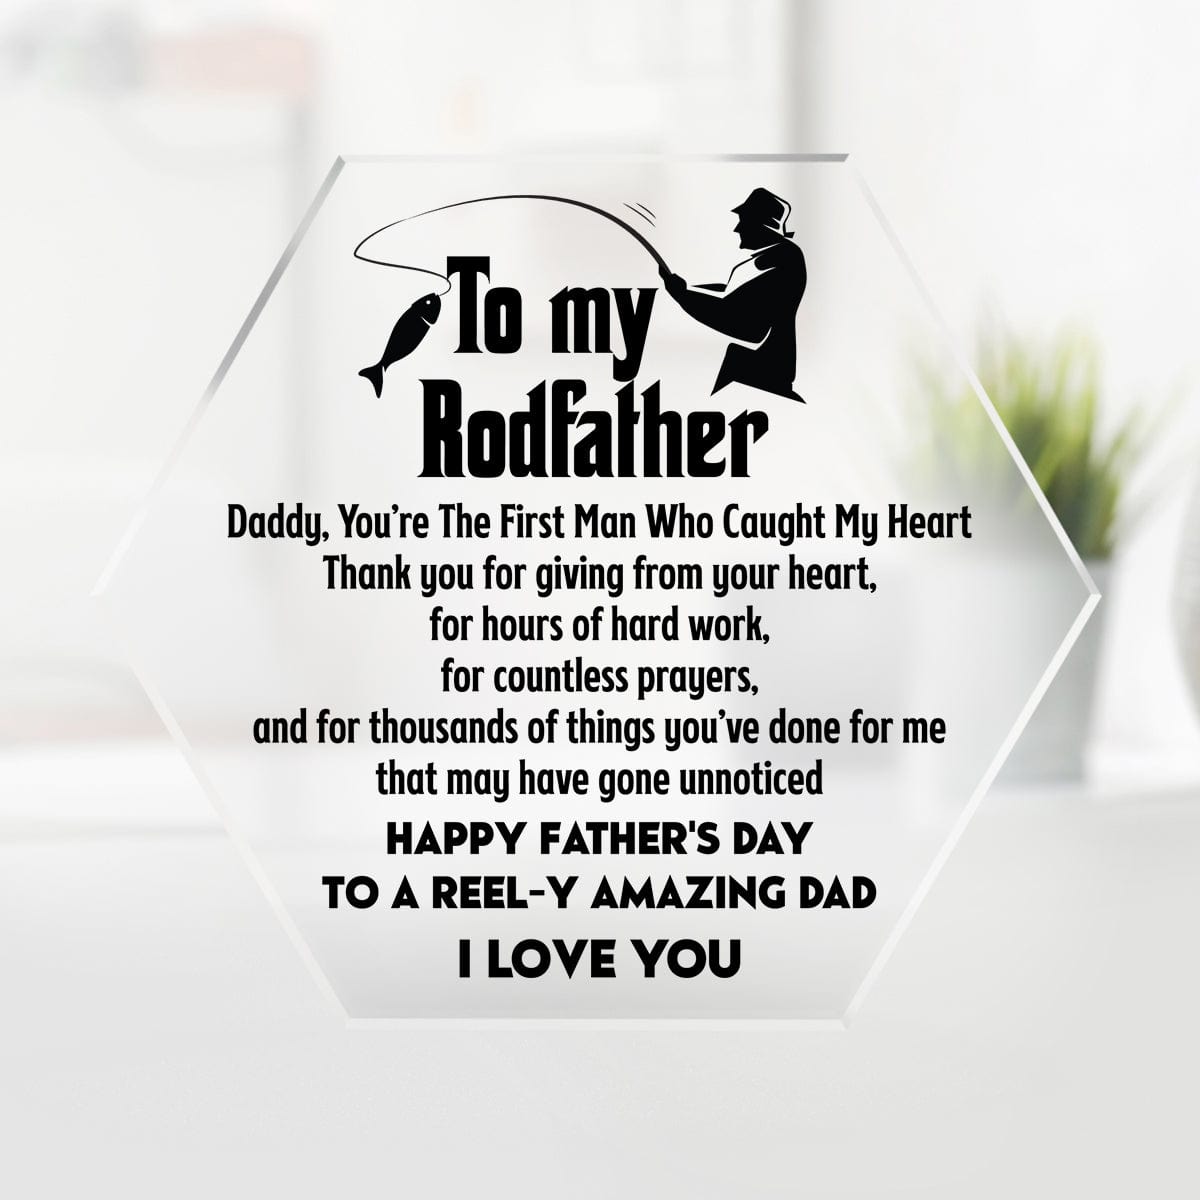 Crystal Plaque - Fishing - To My Rodfather - Happy Father's Day - Gznf18084